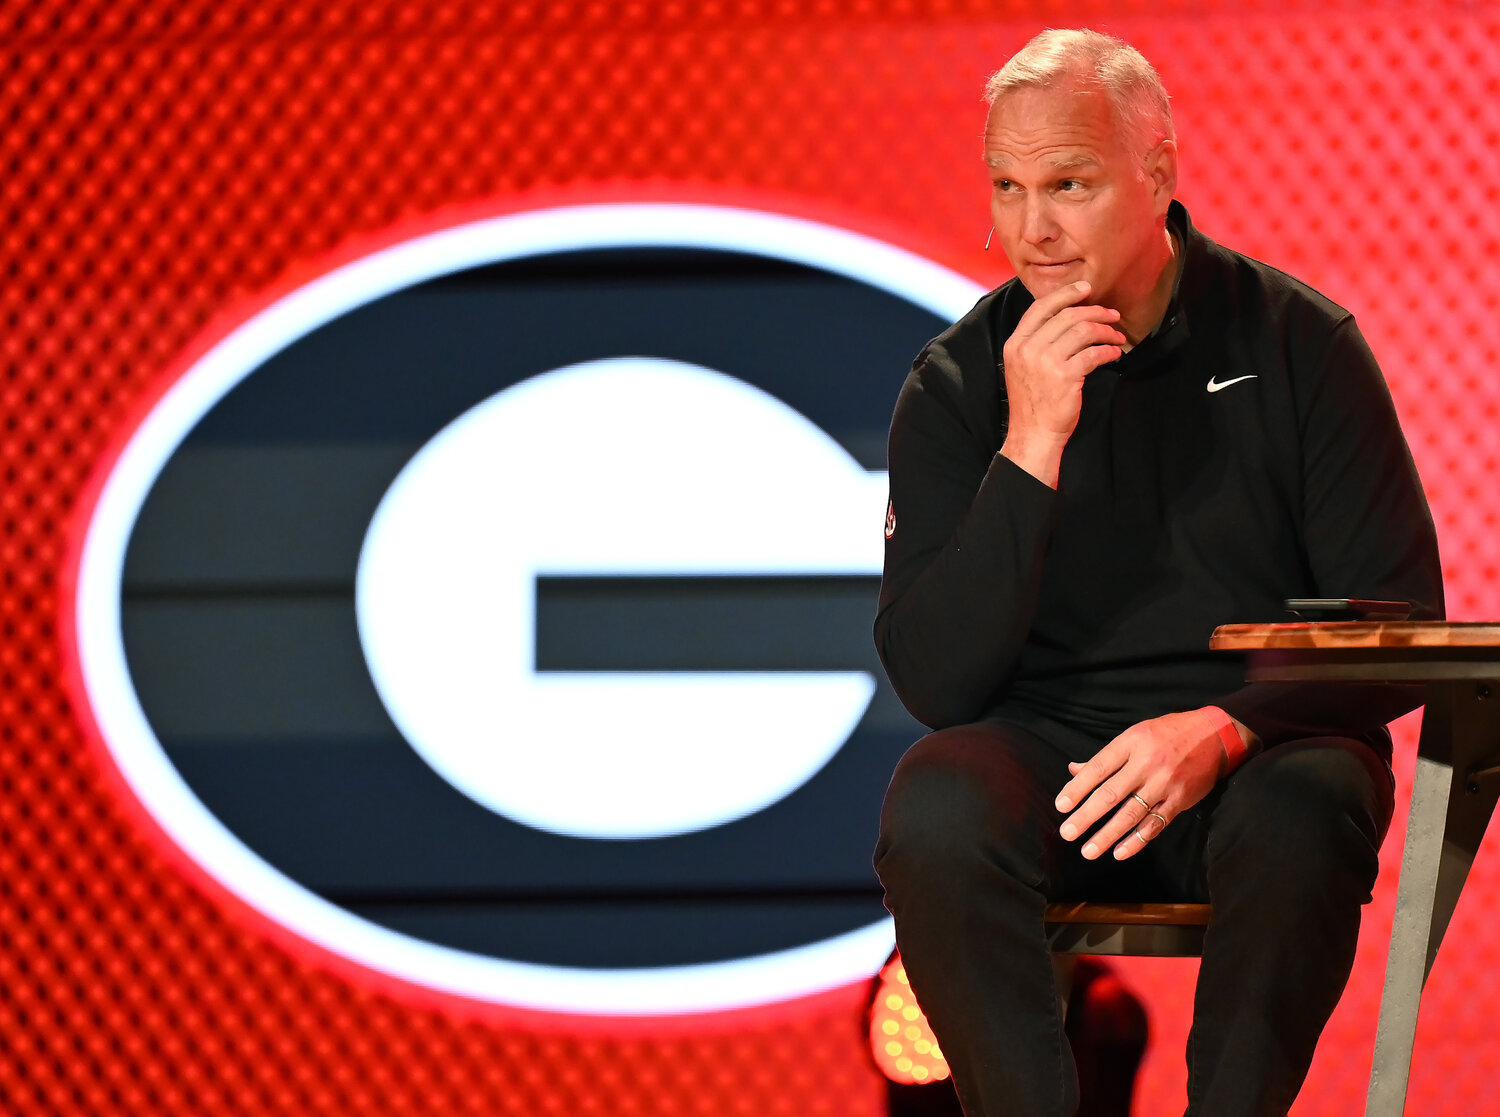 Former UGA football coach Mark Richt looks out at the crowd during the Fellowship of Christian Athletes UGA Night of Champions event on Friday at First Baptist Church of Woodstock. (Index/Henry Durand)